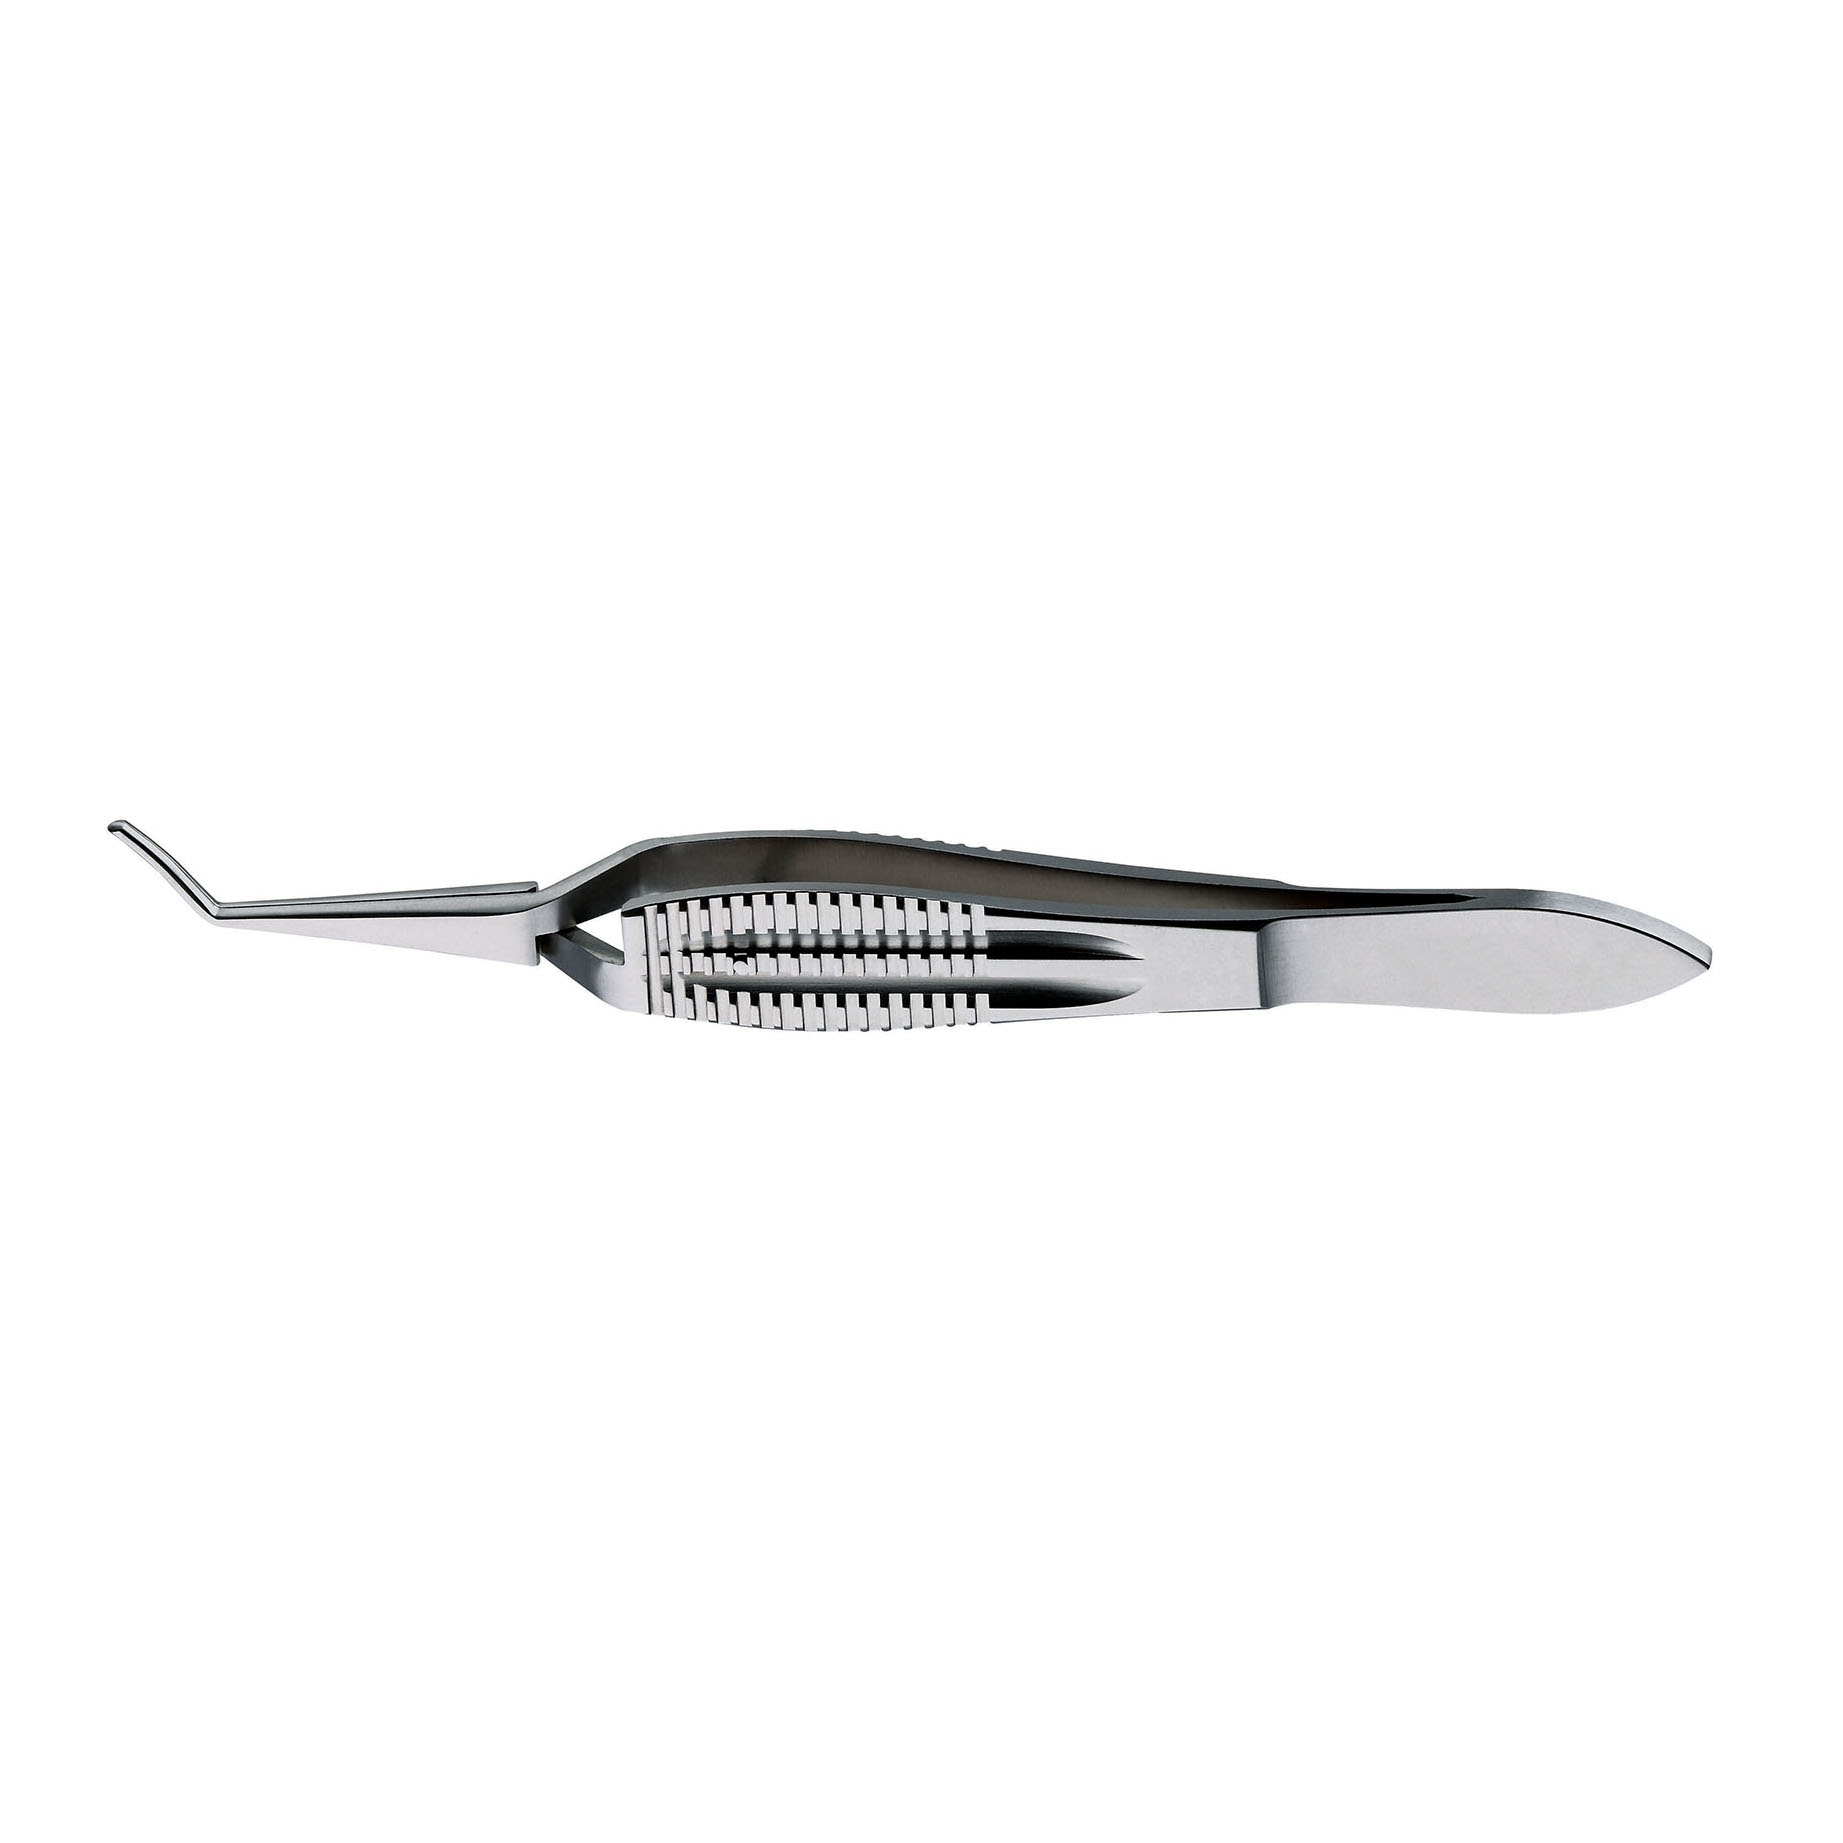 IF-4300 Stainless Steel Scleral Plug Forceps　